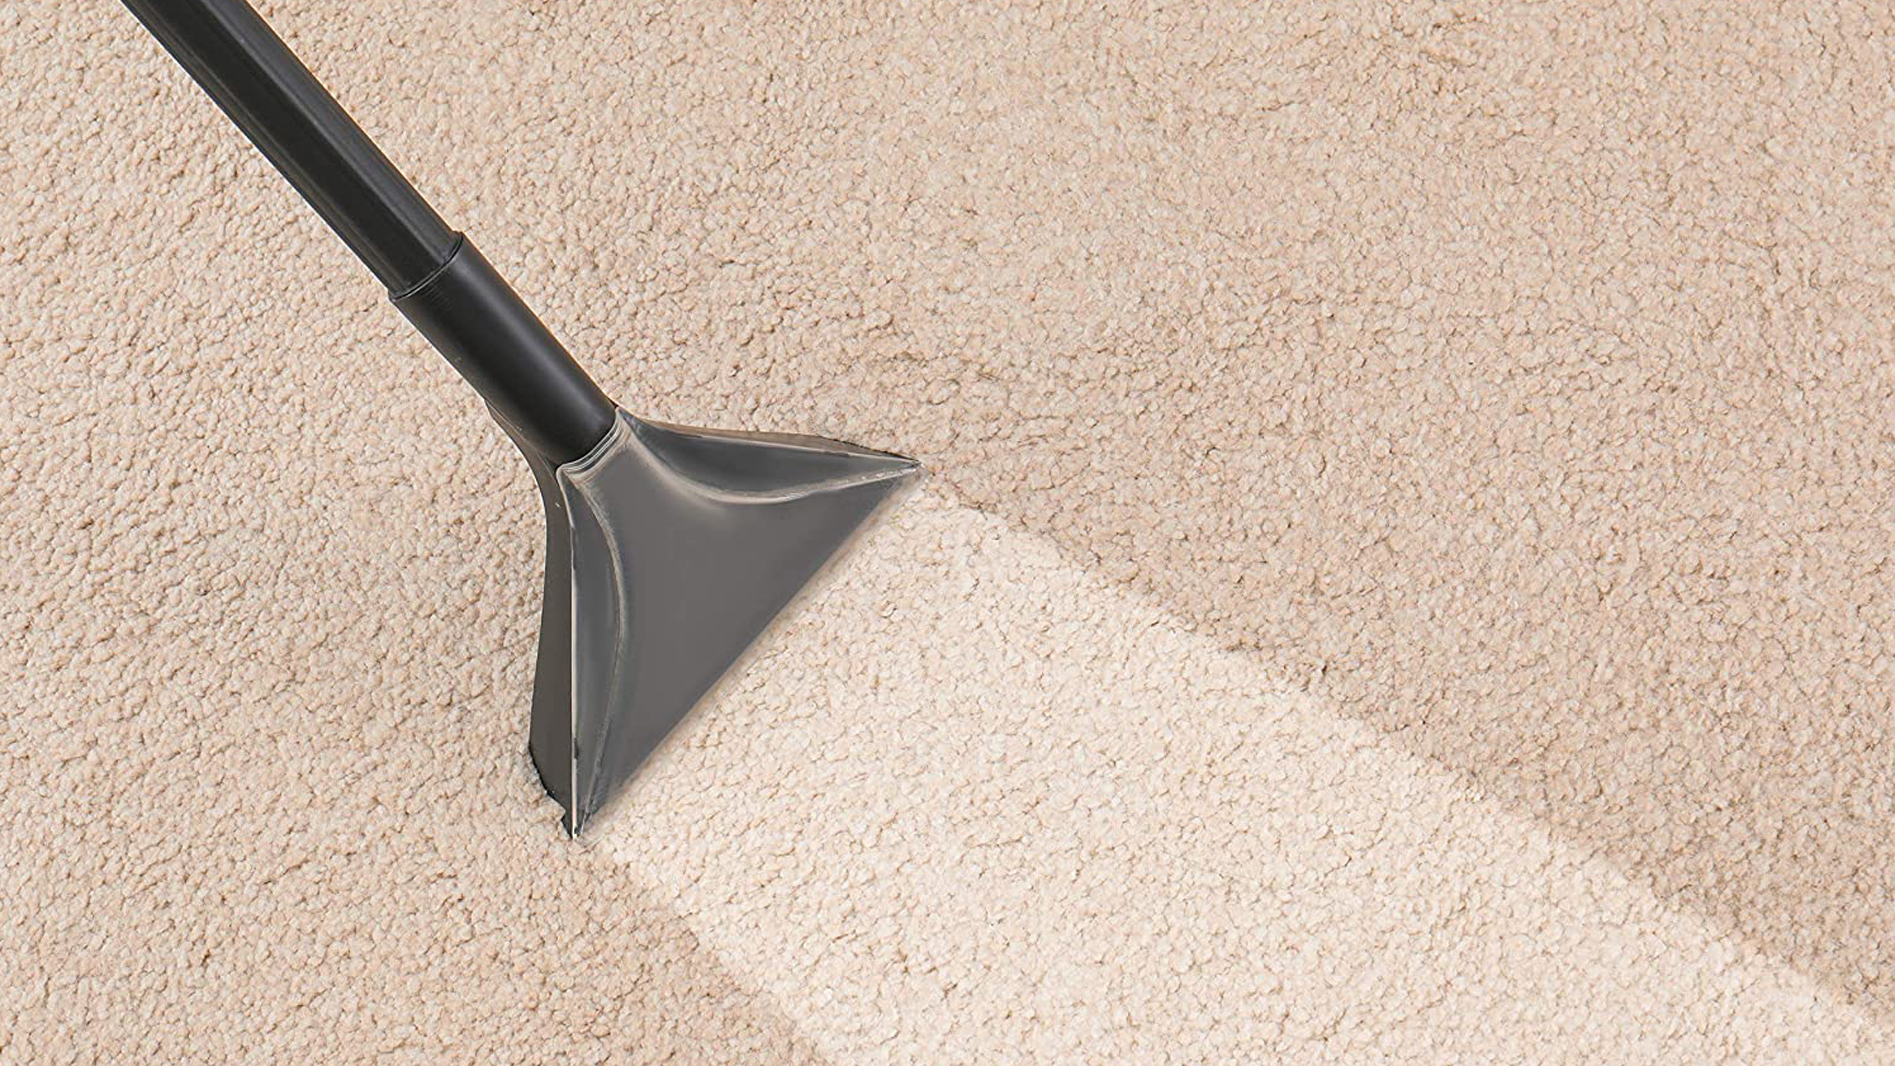 Cleaning Solution for Carpet